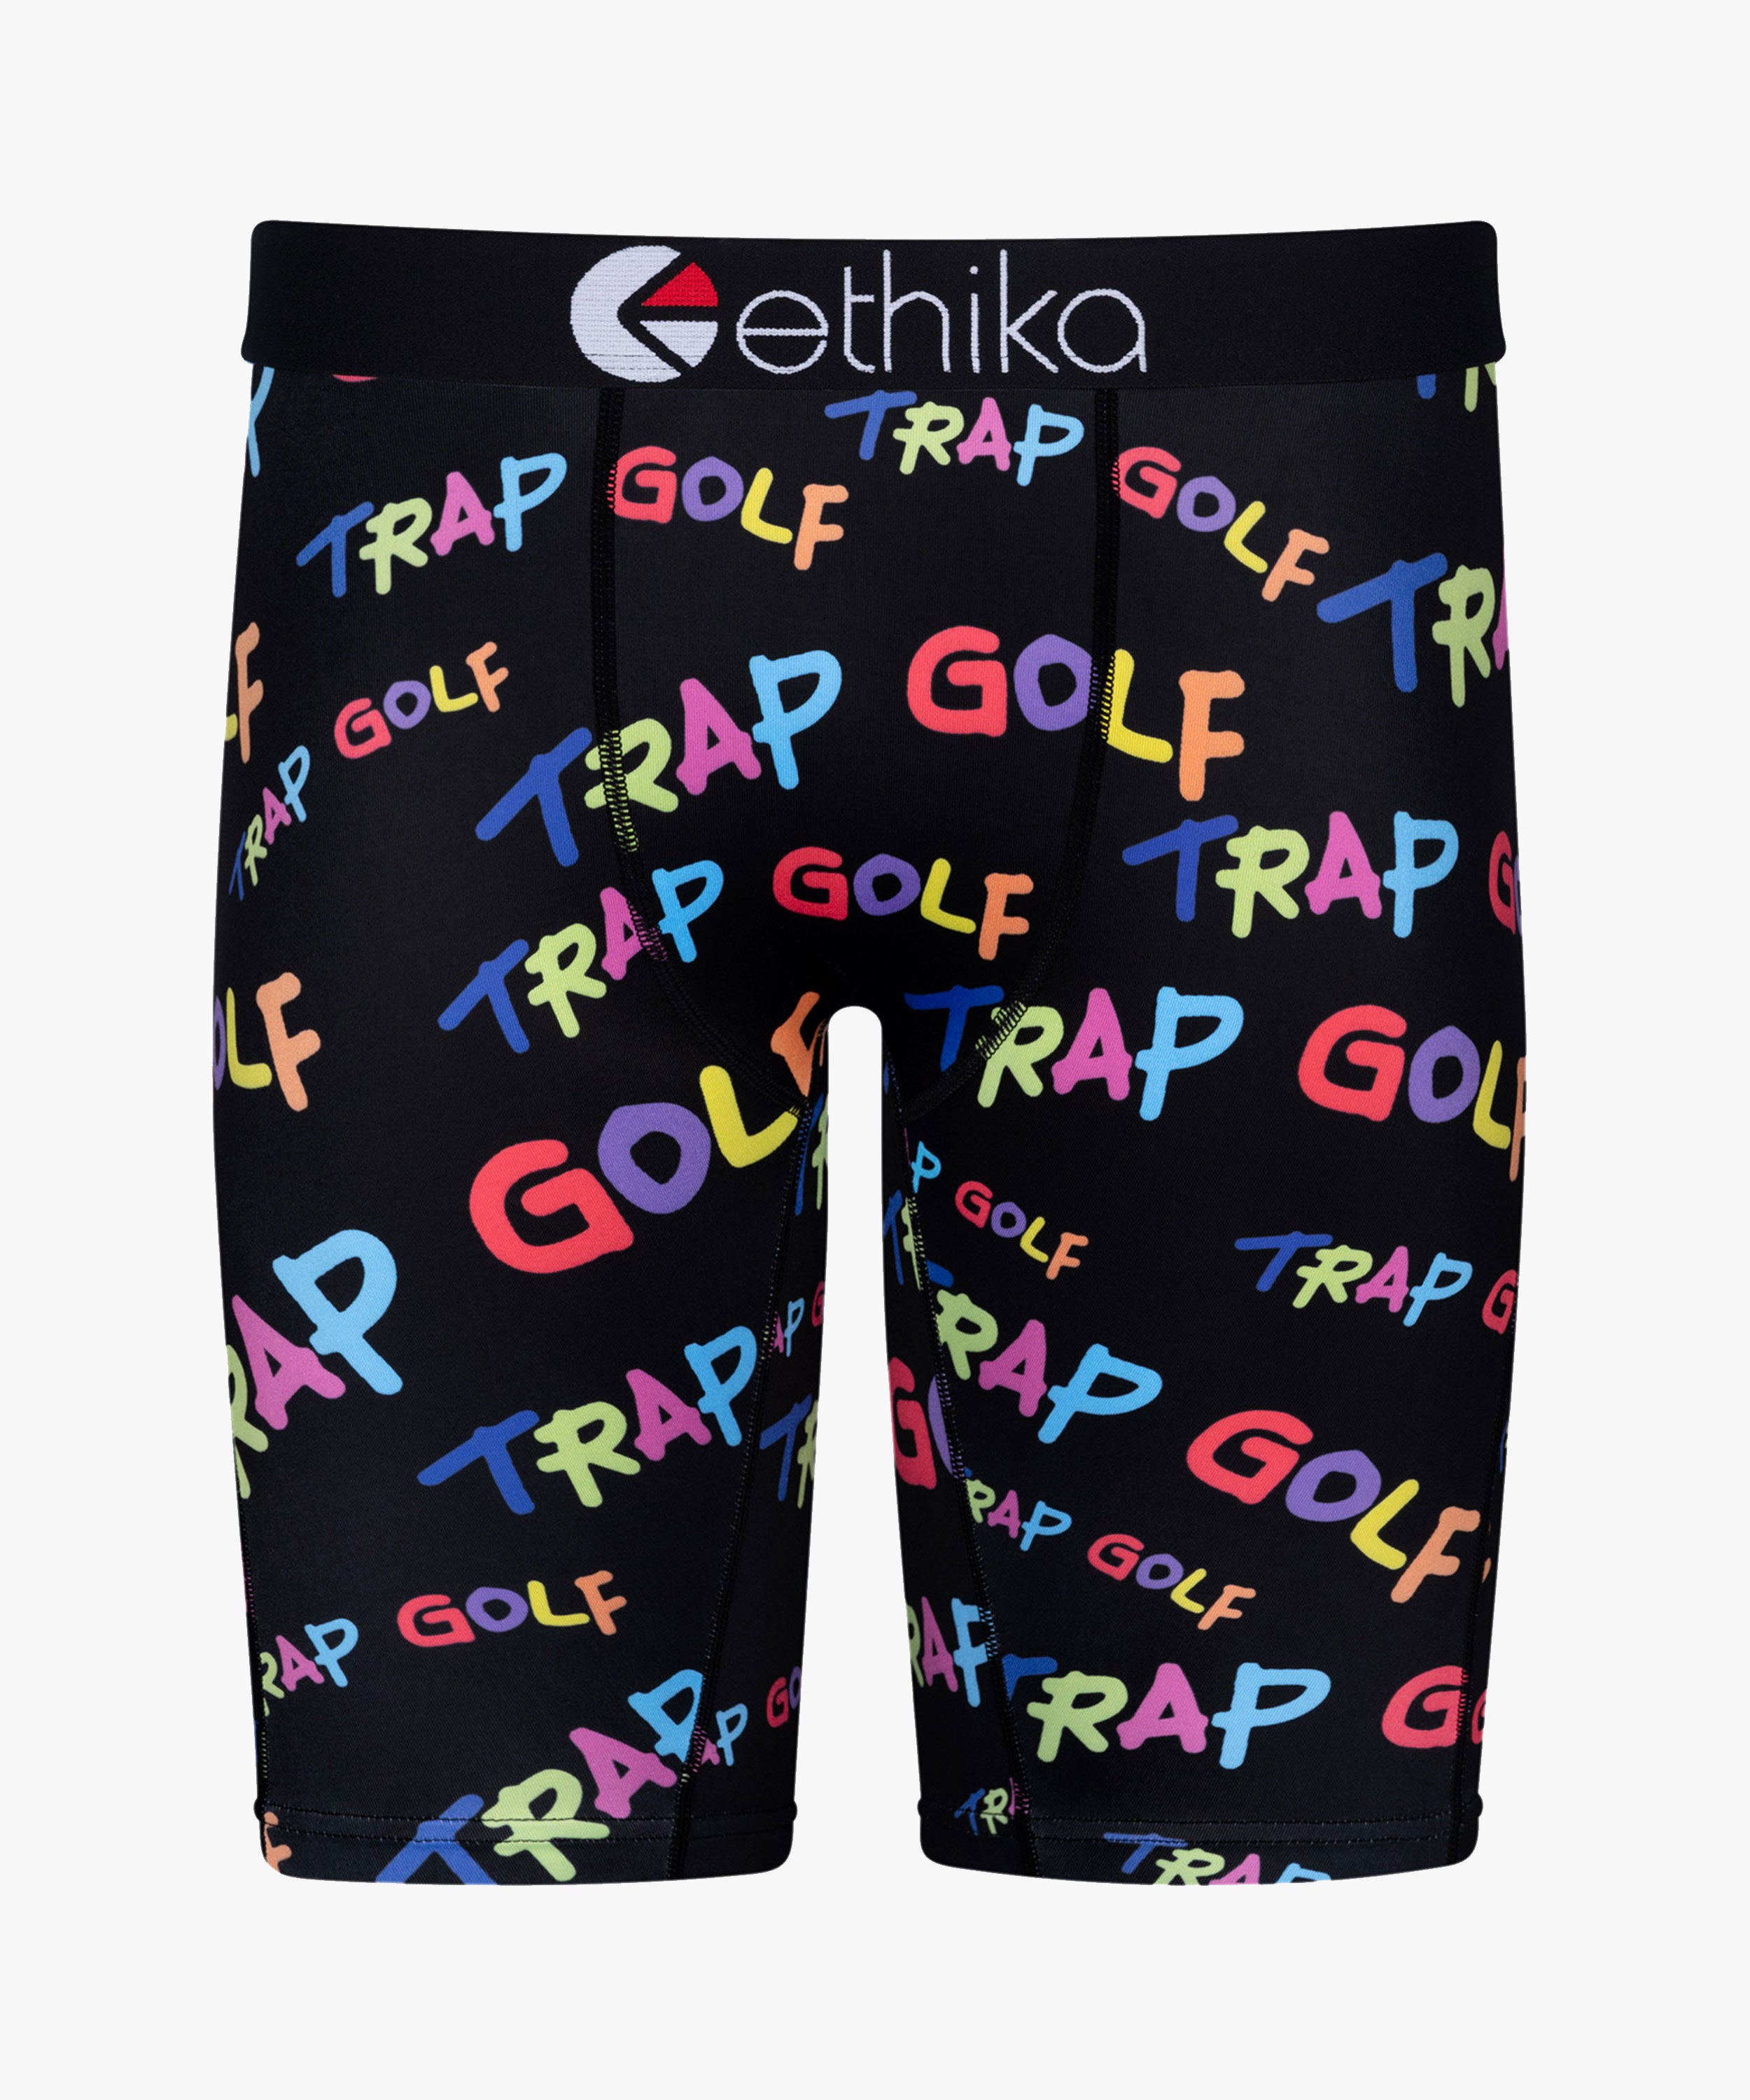 Trappy Colors Ethika Mens Staple – Trap Golf